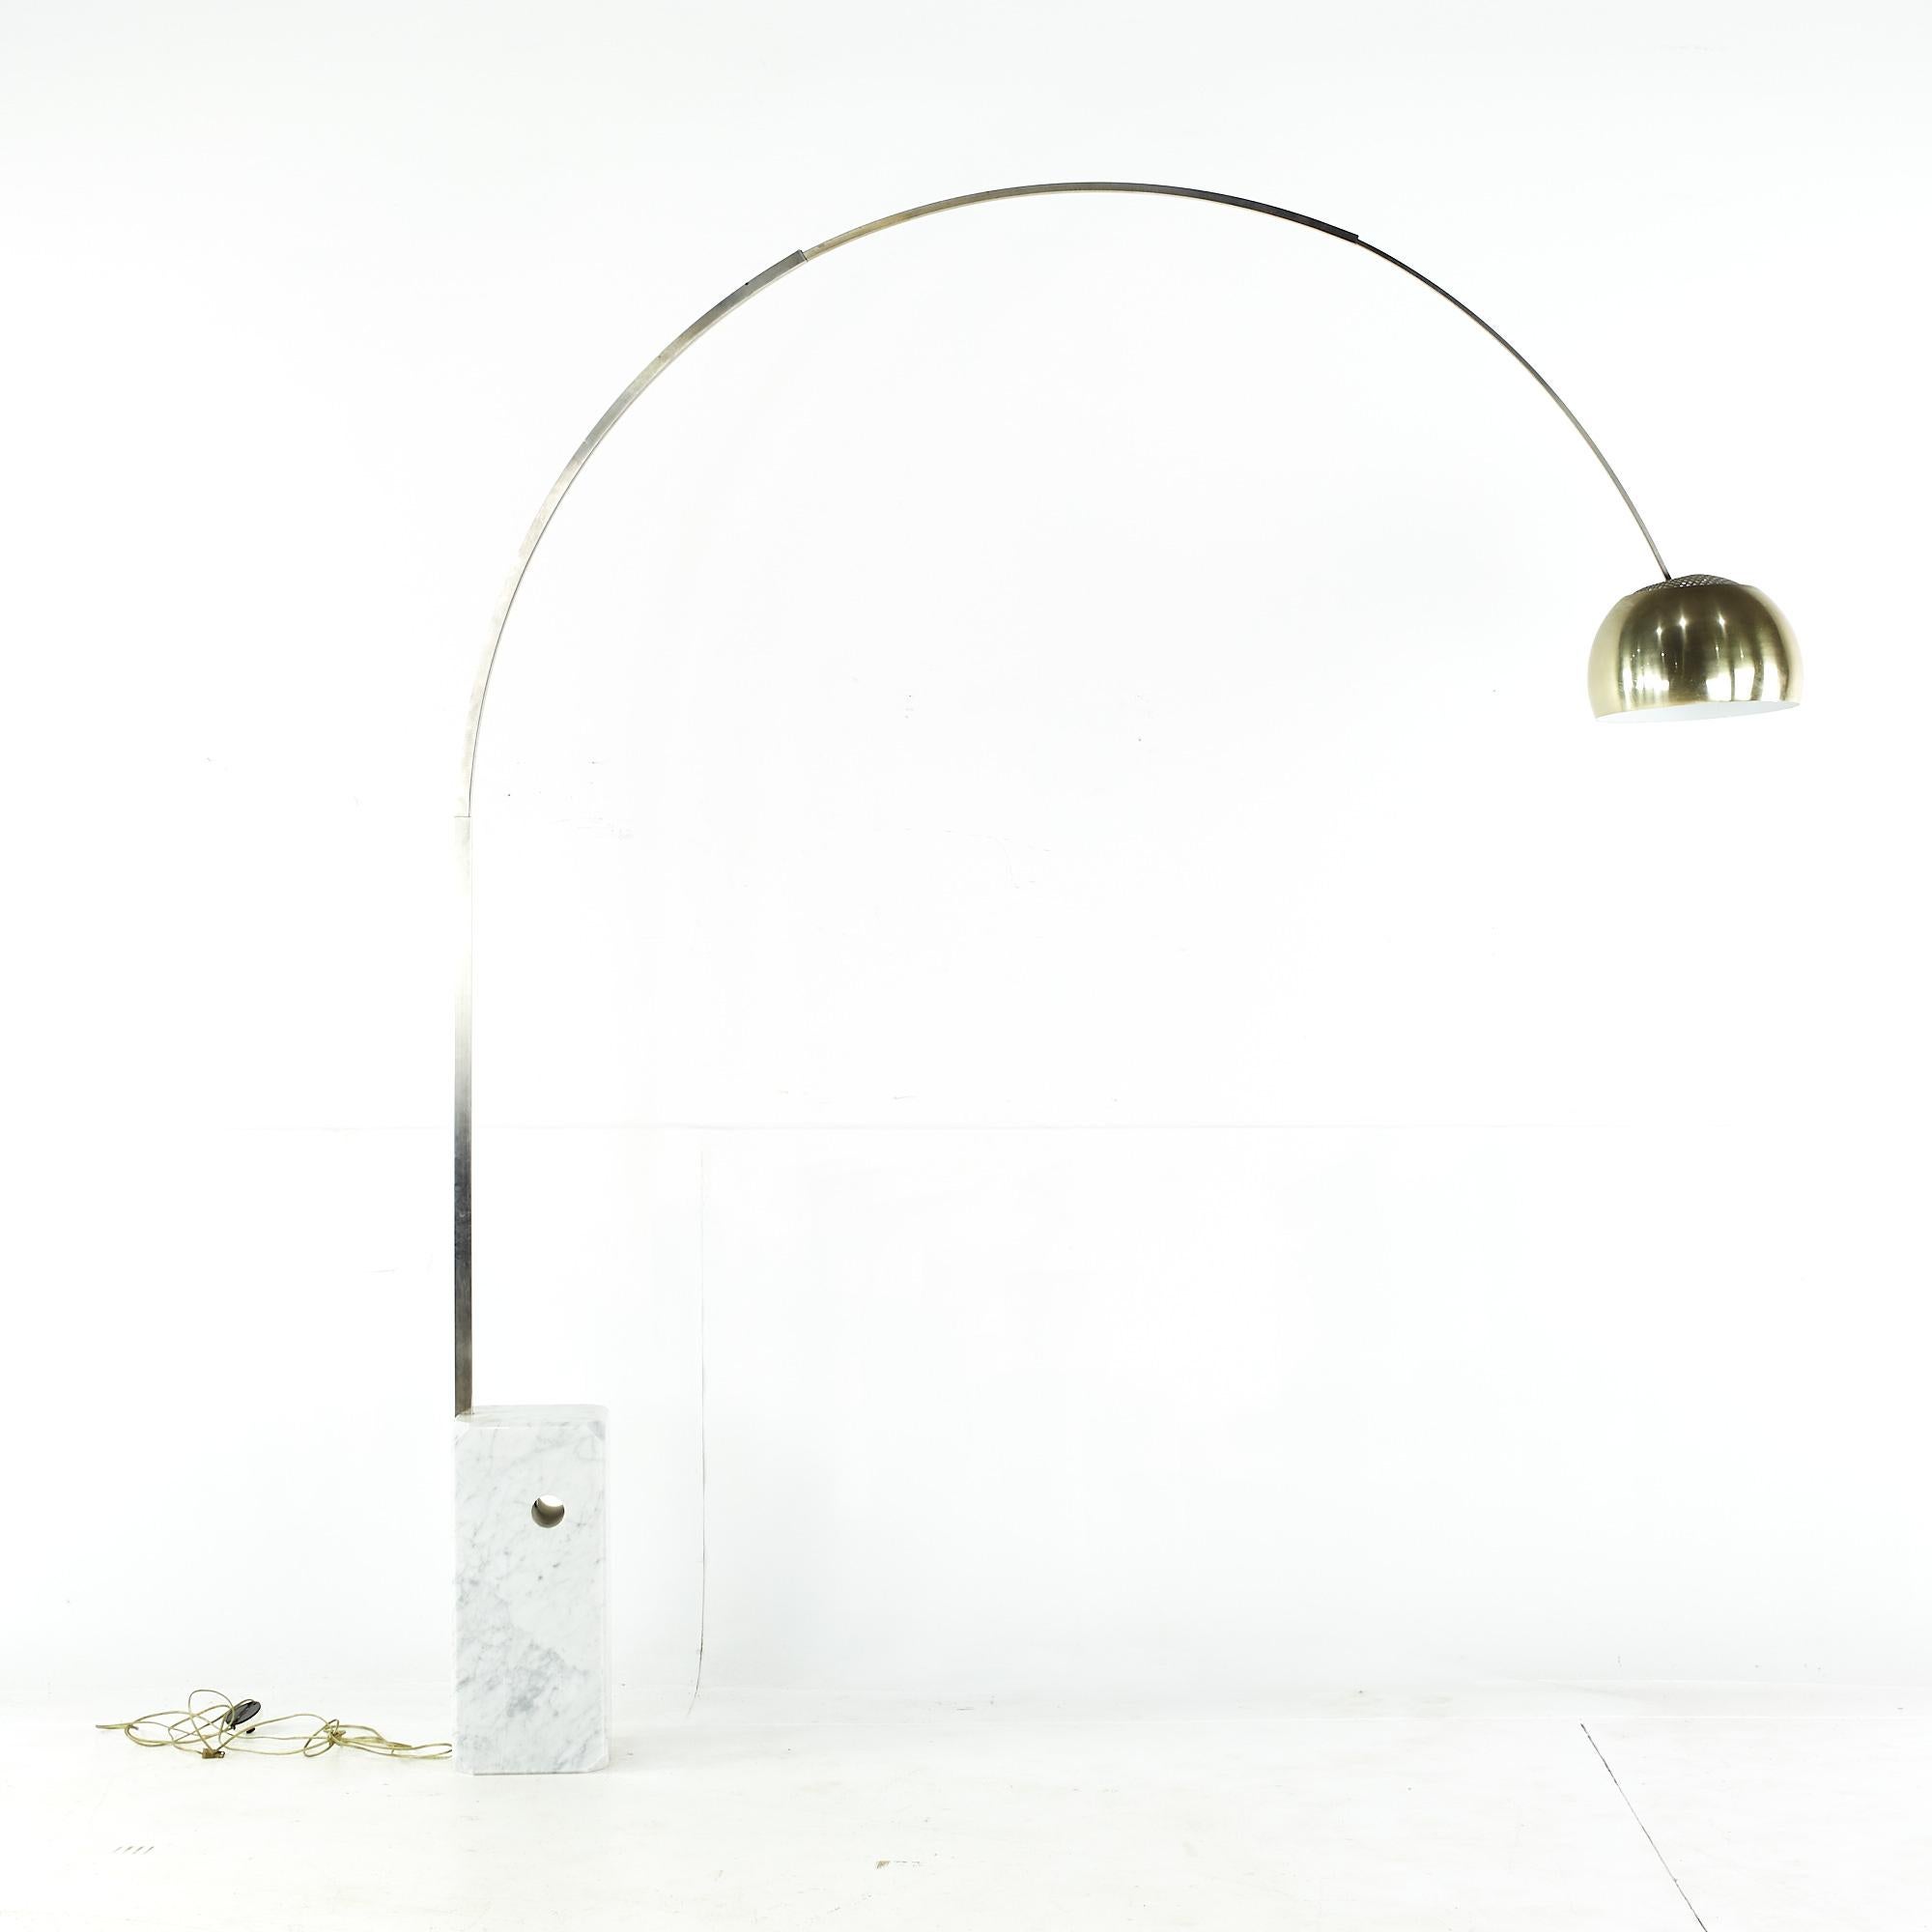 Arco mid-century brass and marble floor lamp.

This floor lamp measures: 82 wide x 12. 5 deep x 97 inches high.

All pieces of furniture can be had in what we call restored vintage condition. That means the piece is restored upon purchase so